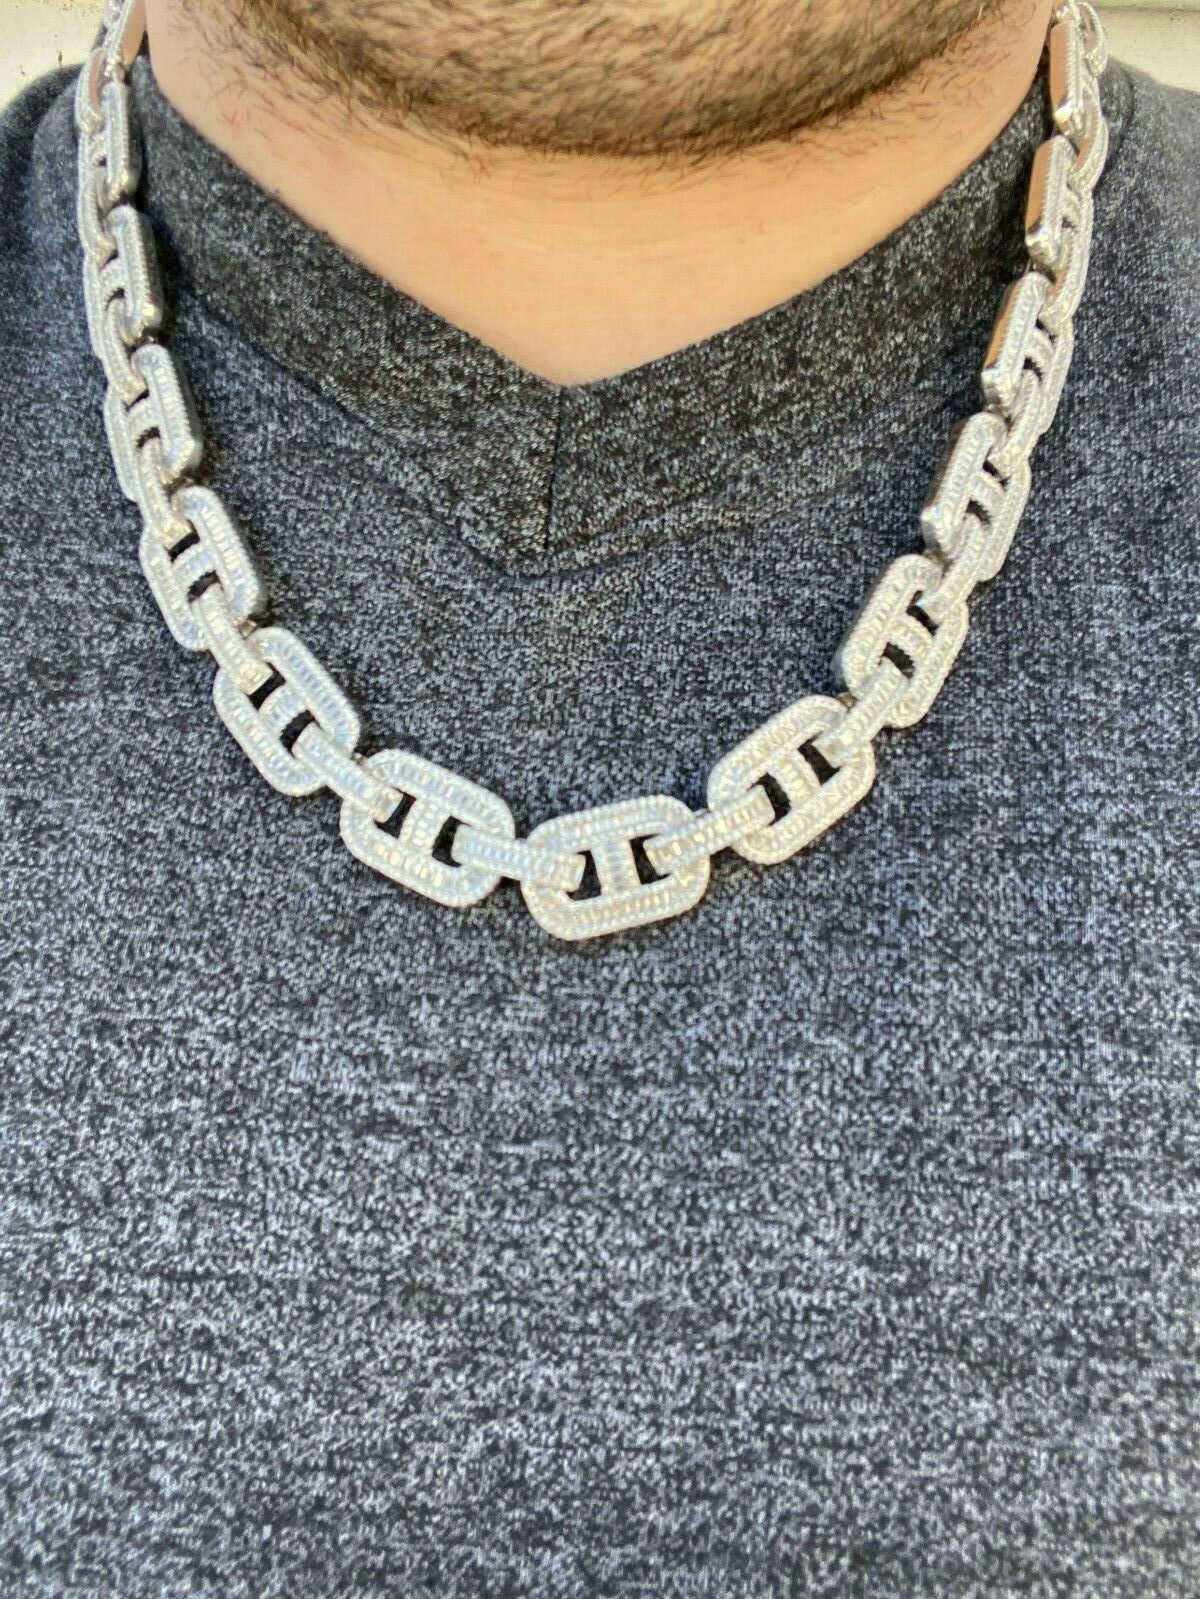 15mm Baguette Gucci Chain Solid Sterling Silver